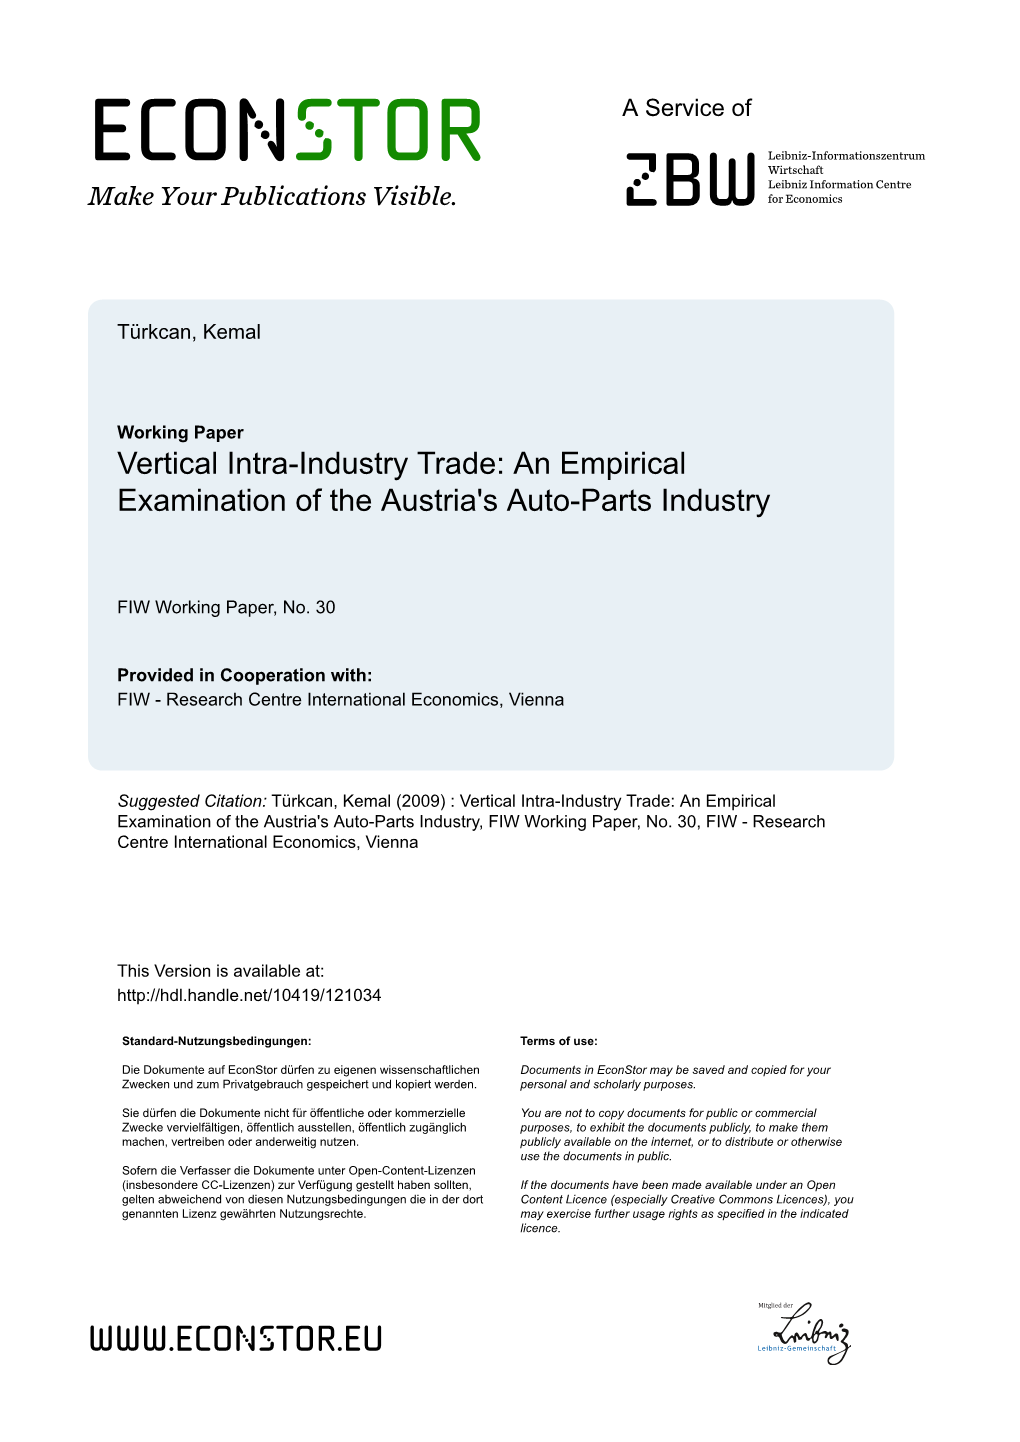 Vertical Intra-Industry Trade: an Empirical Examination of the Austria's Auto-Parts Industry